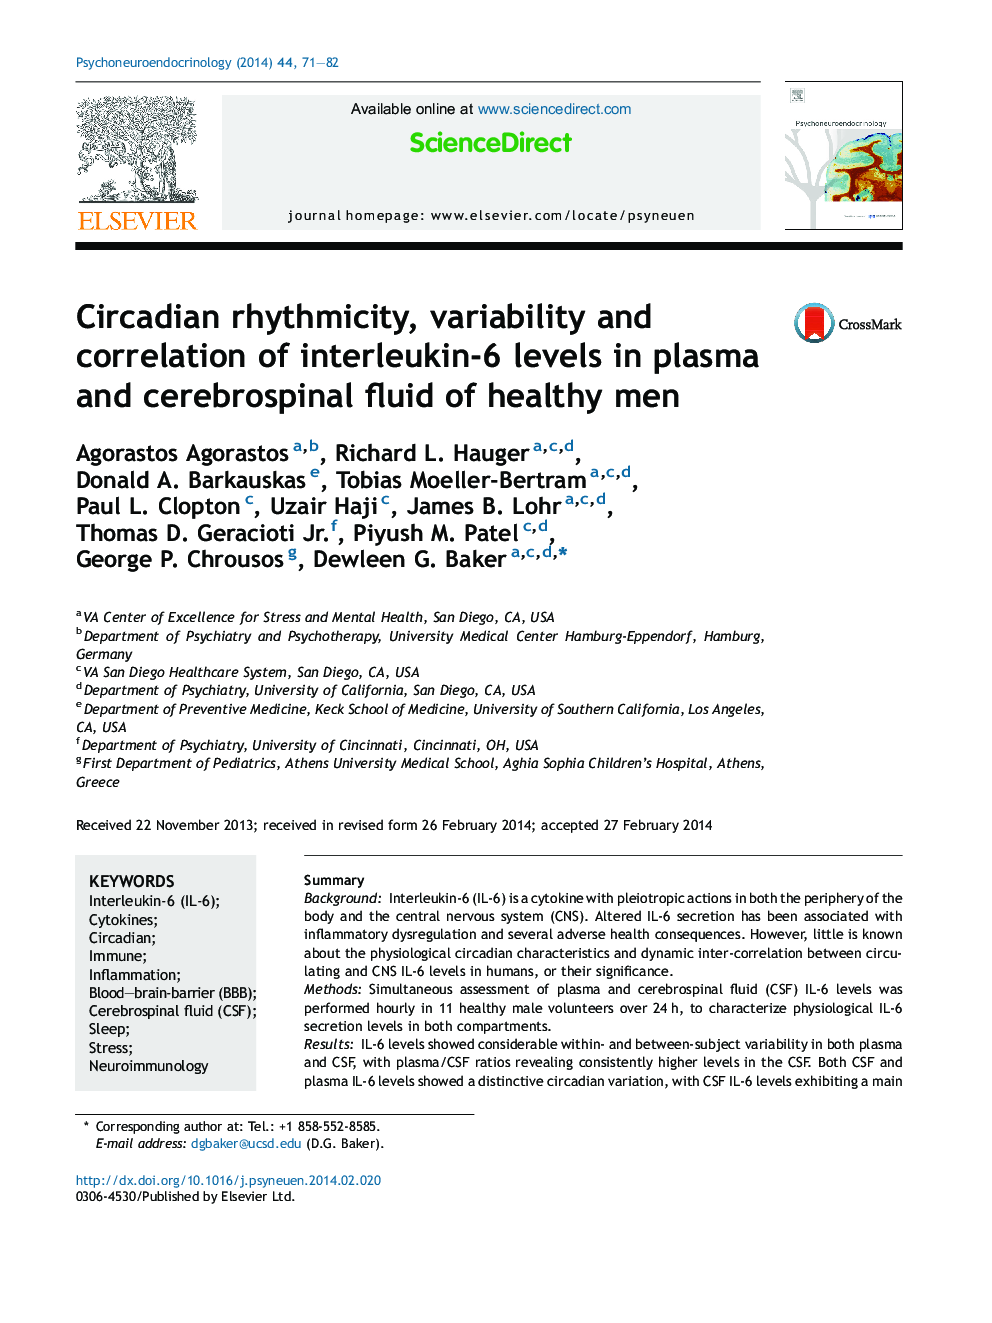 Circadian rhythmicity, variability and correlation of interleukin-6 levels in plasma and cerebrospinal fluid of healthy men